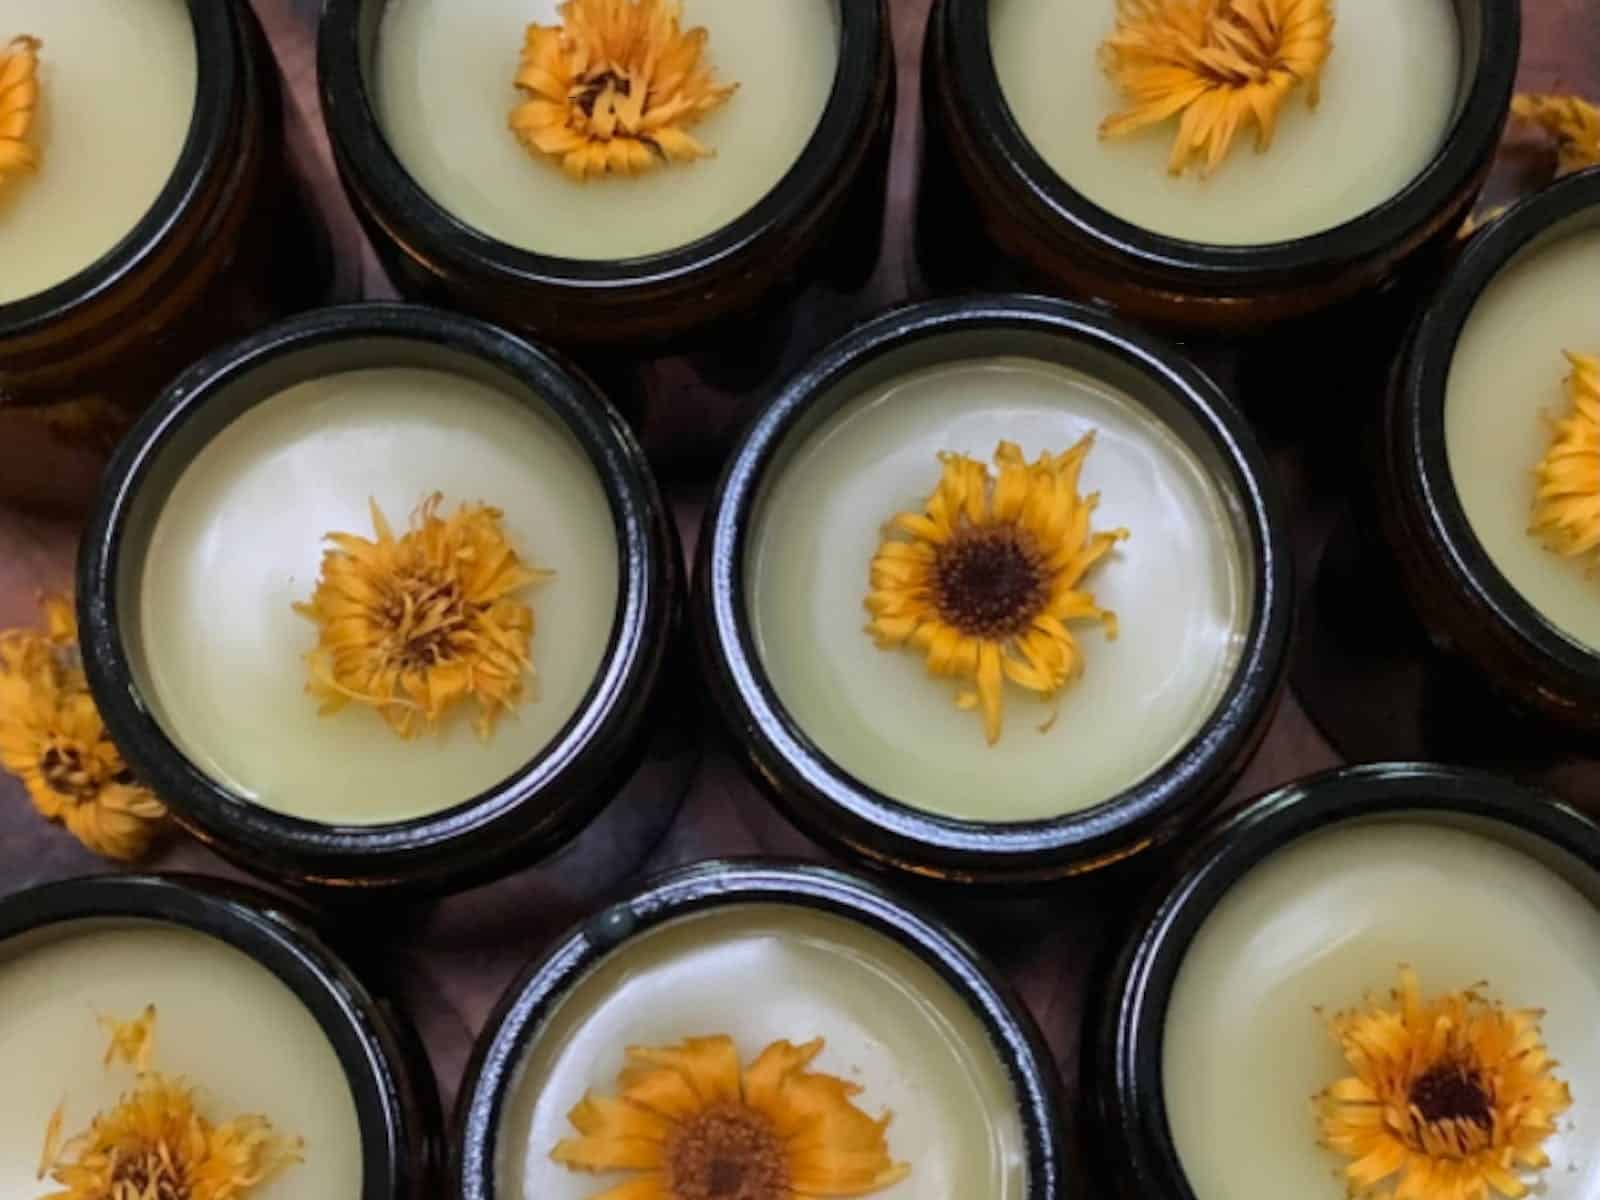 Image looking down on rows of jars with white liquid and yellow flowers